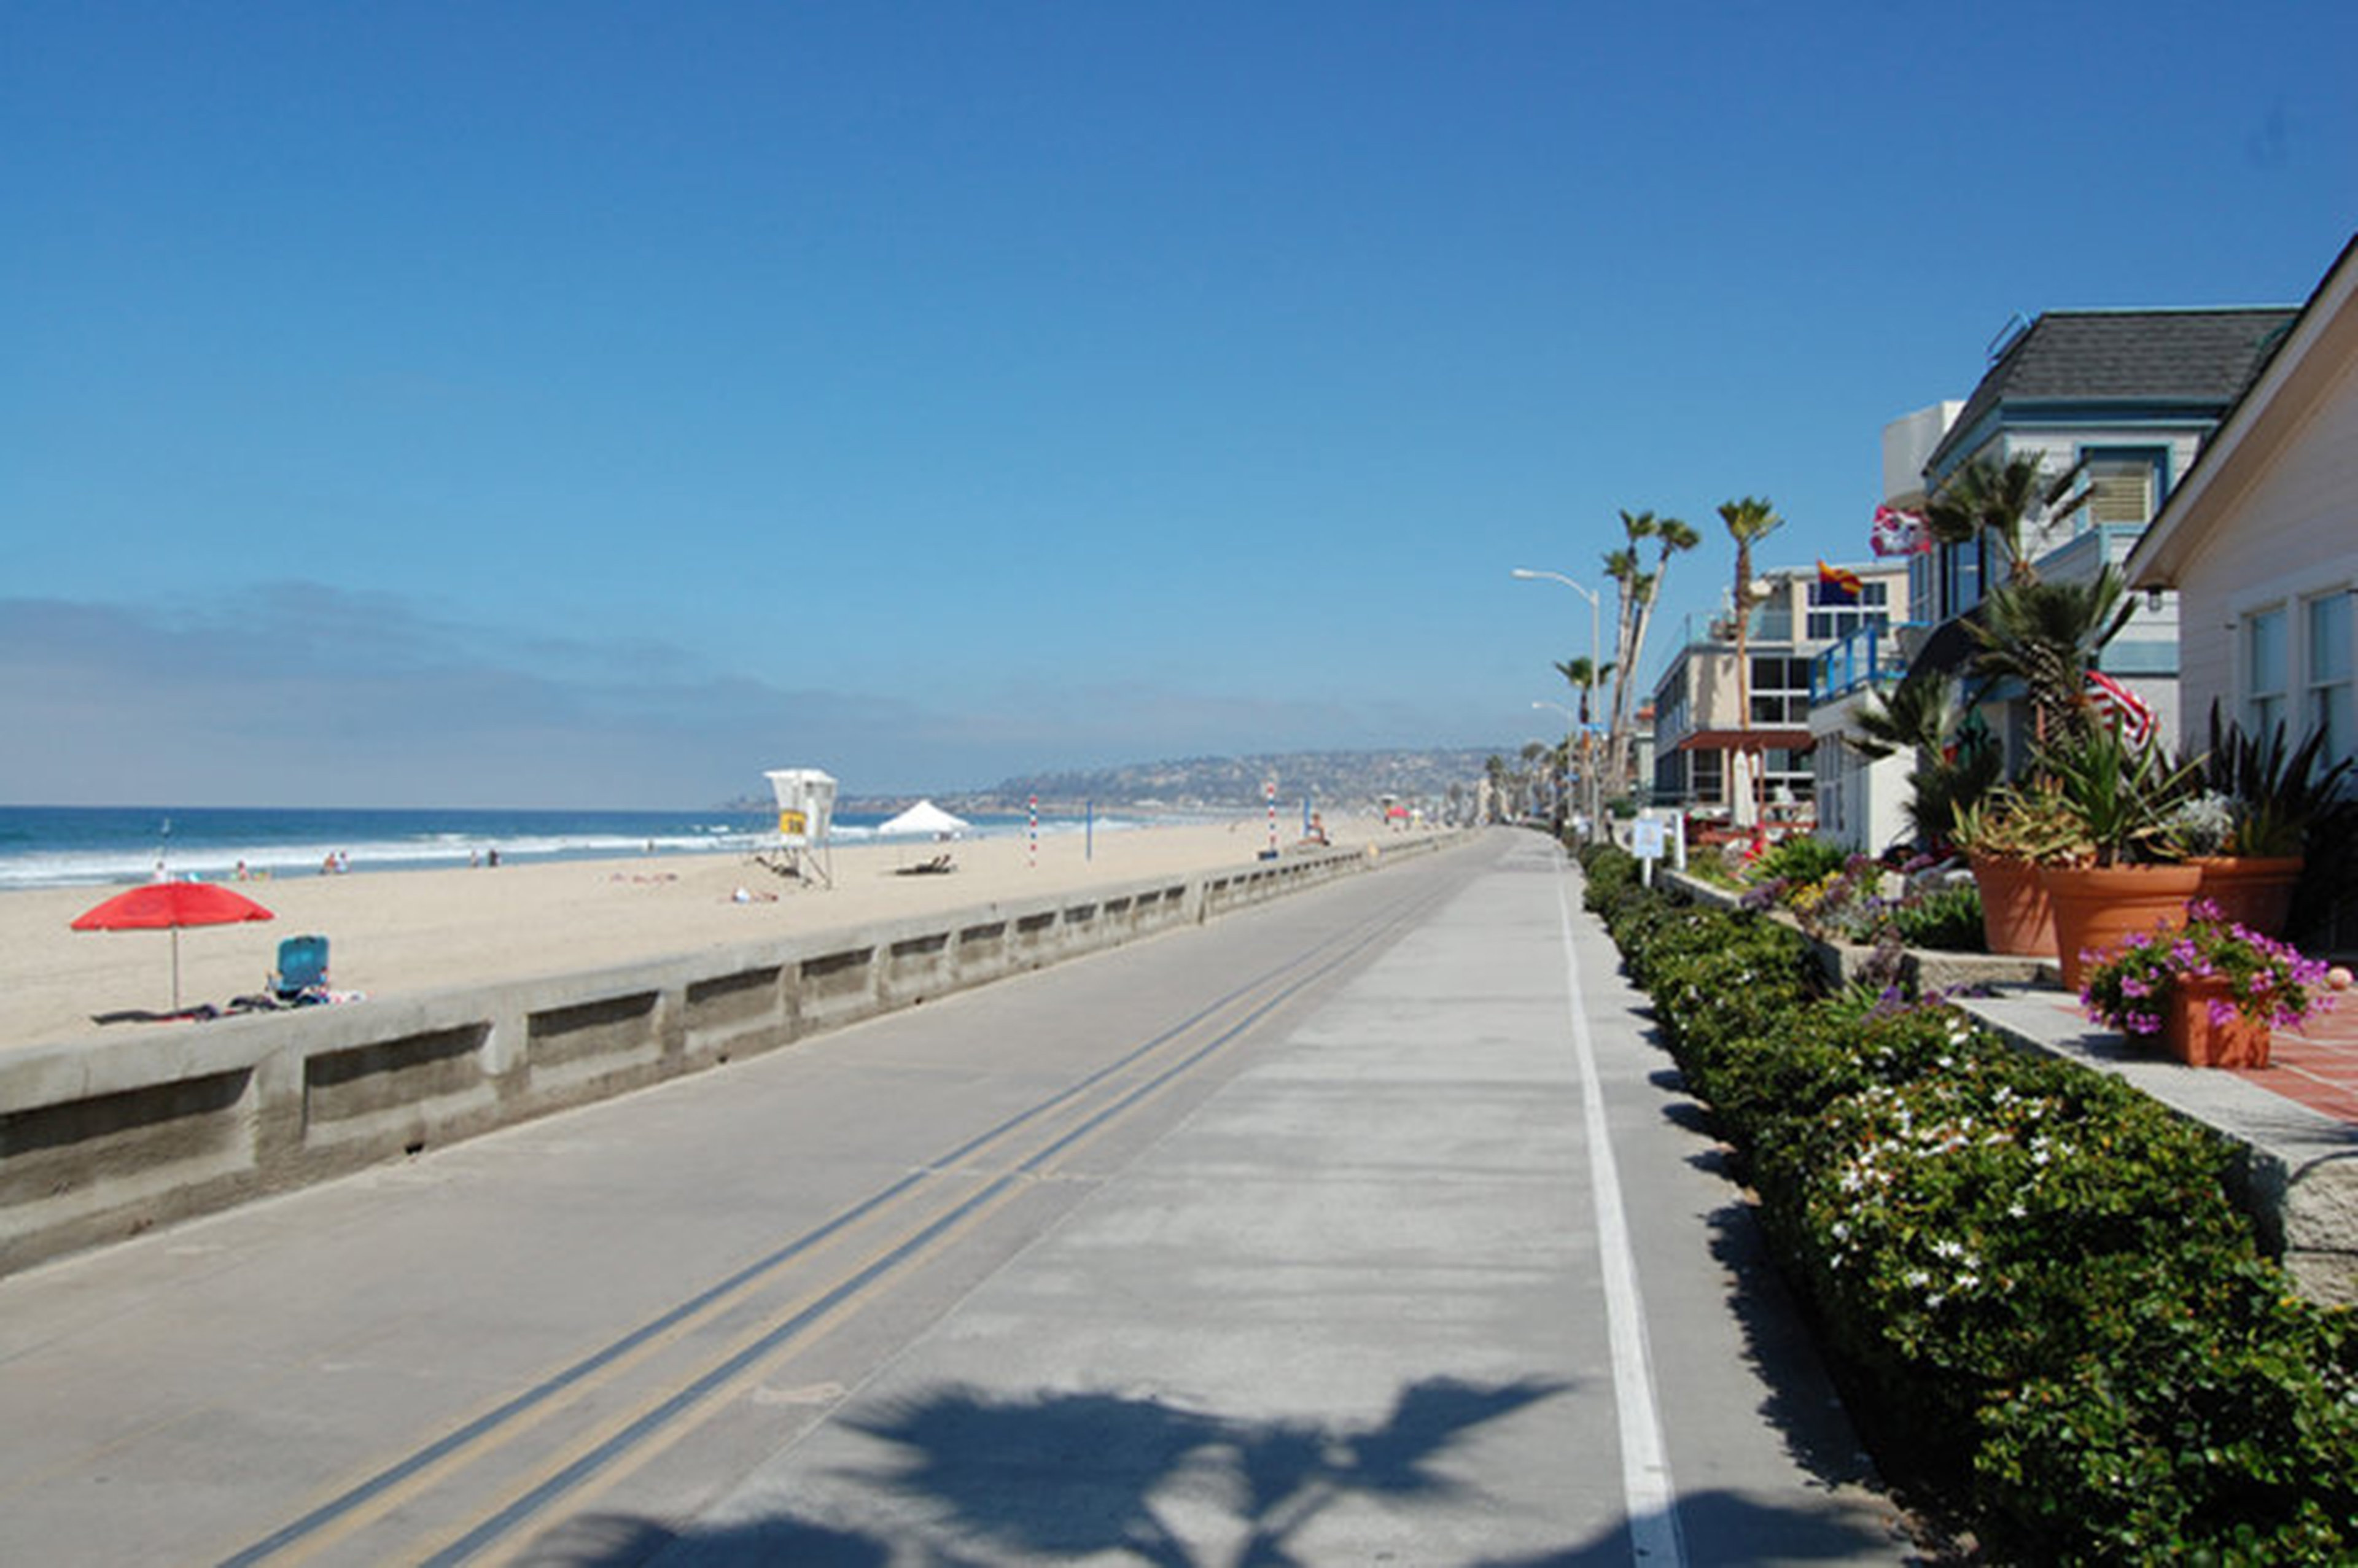 Stroll your way to a good time on the Pacific Beach Boardwalk.